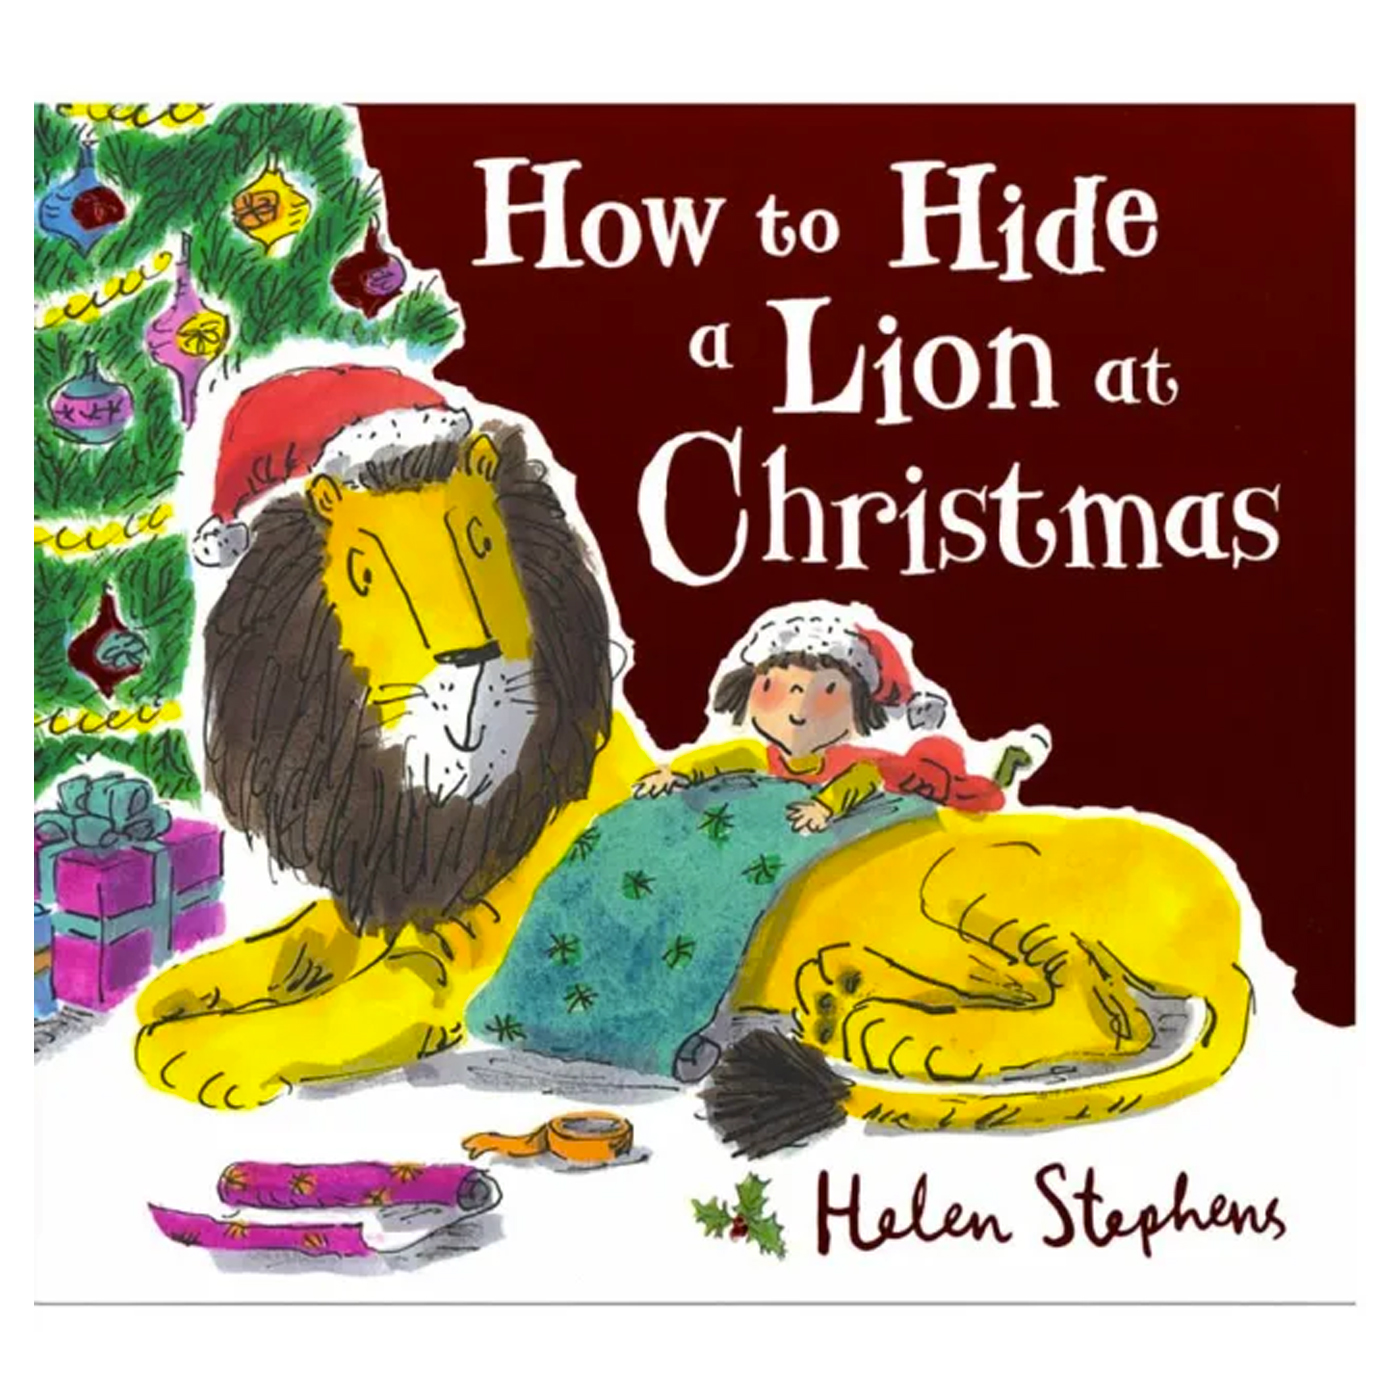  How to Hide a Lion at Christmas